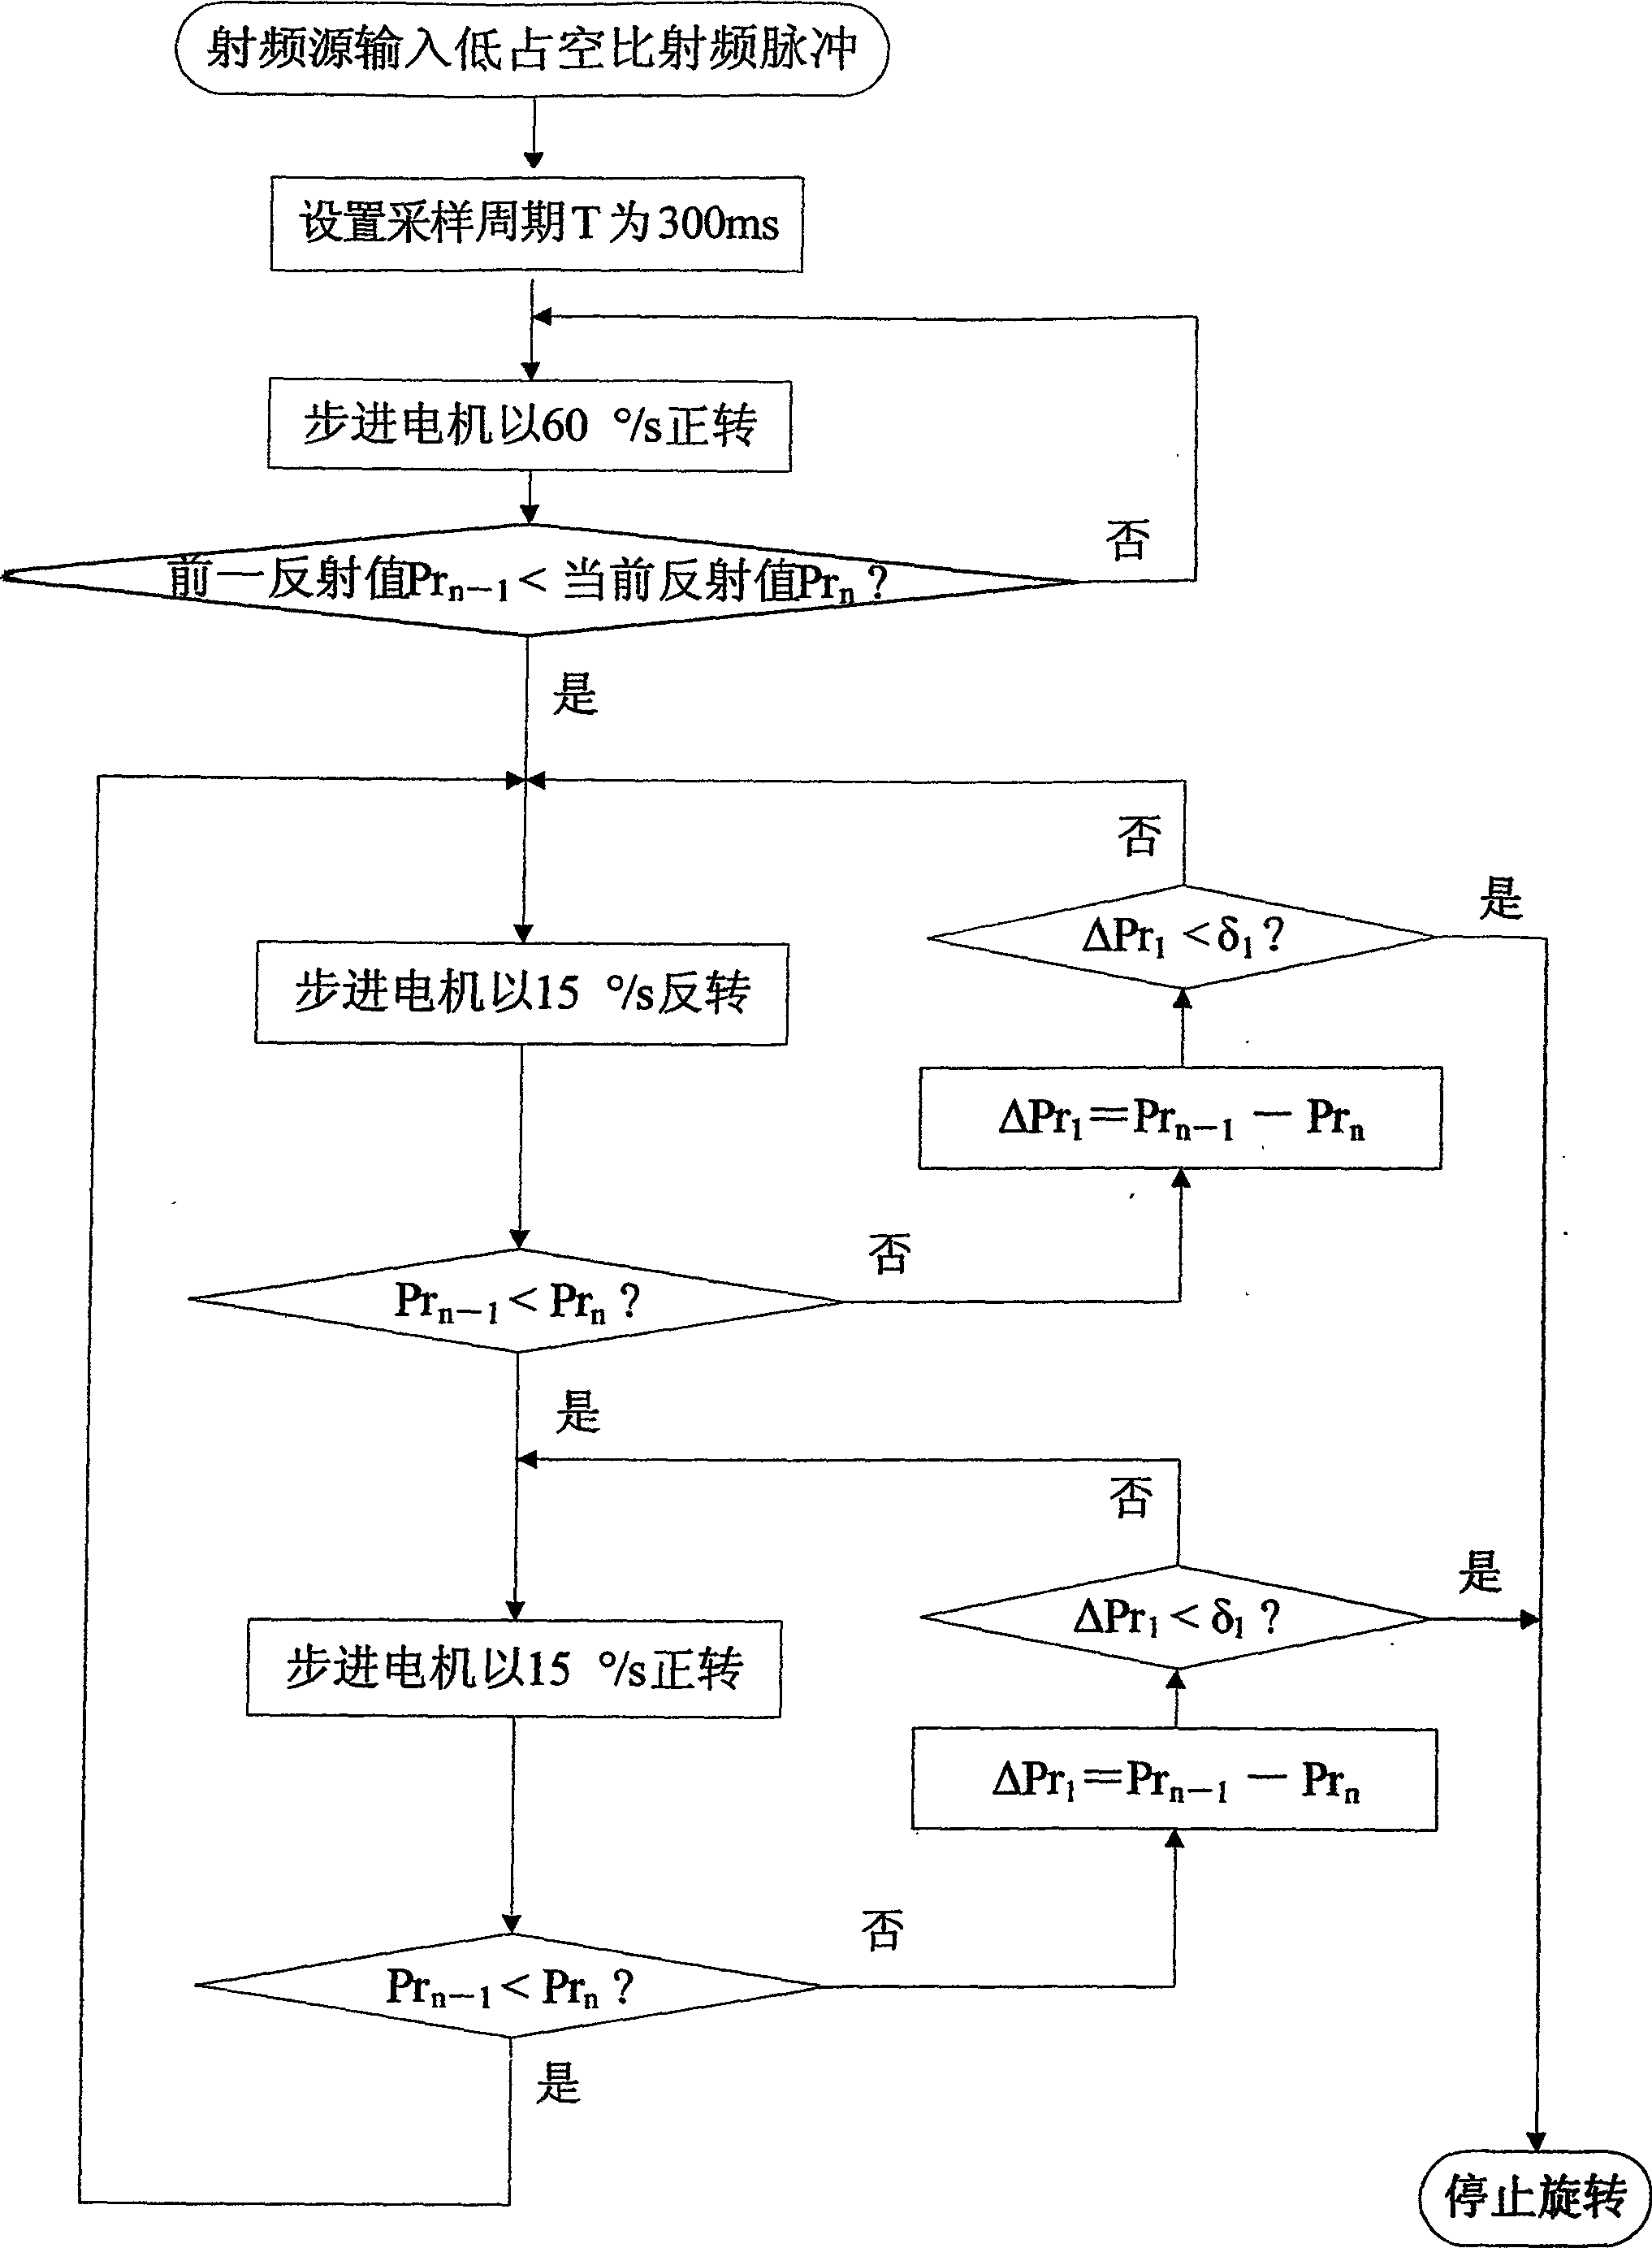 Automatic adjusting device and method of the variable capacitor of the RF board bar CO2 laser matching system